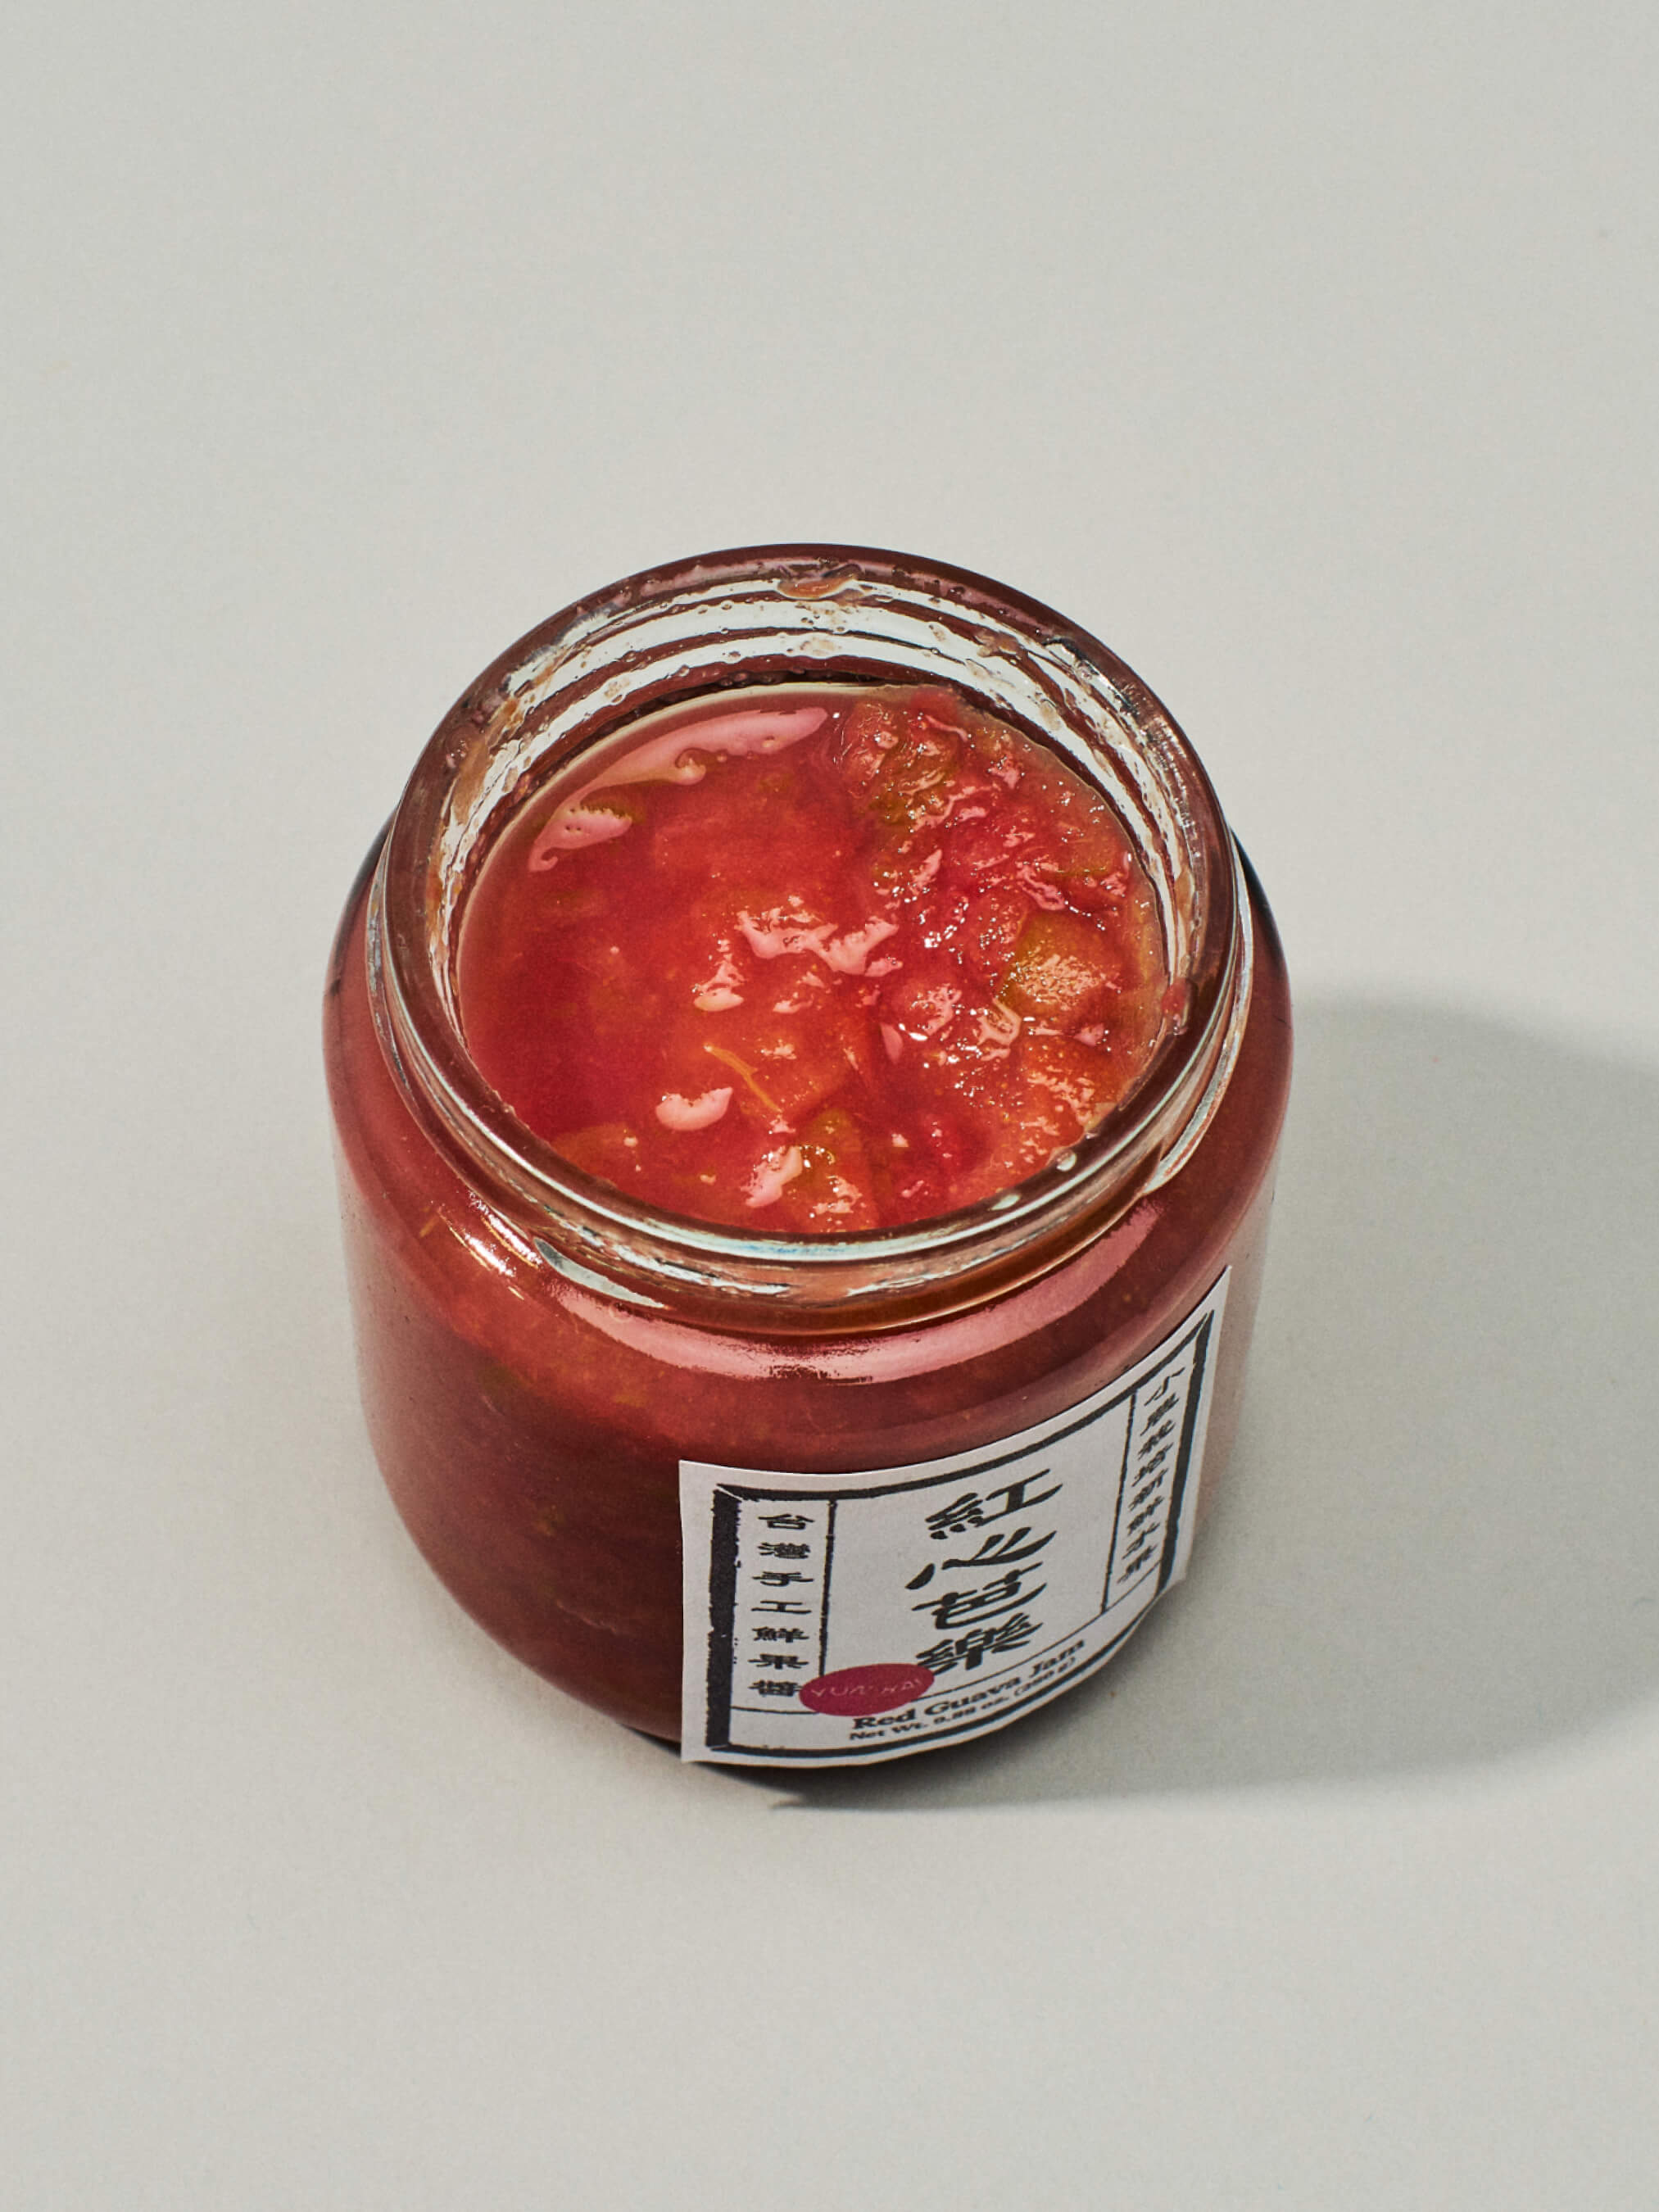 Taiwanese Red Guava Jam